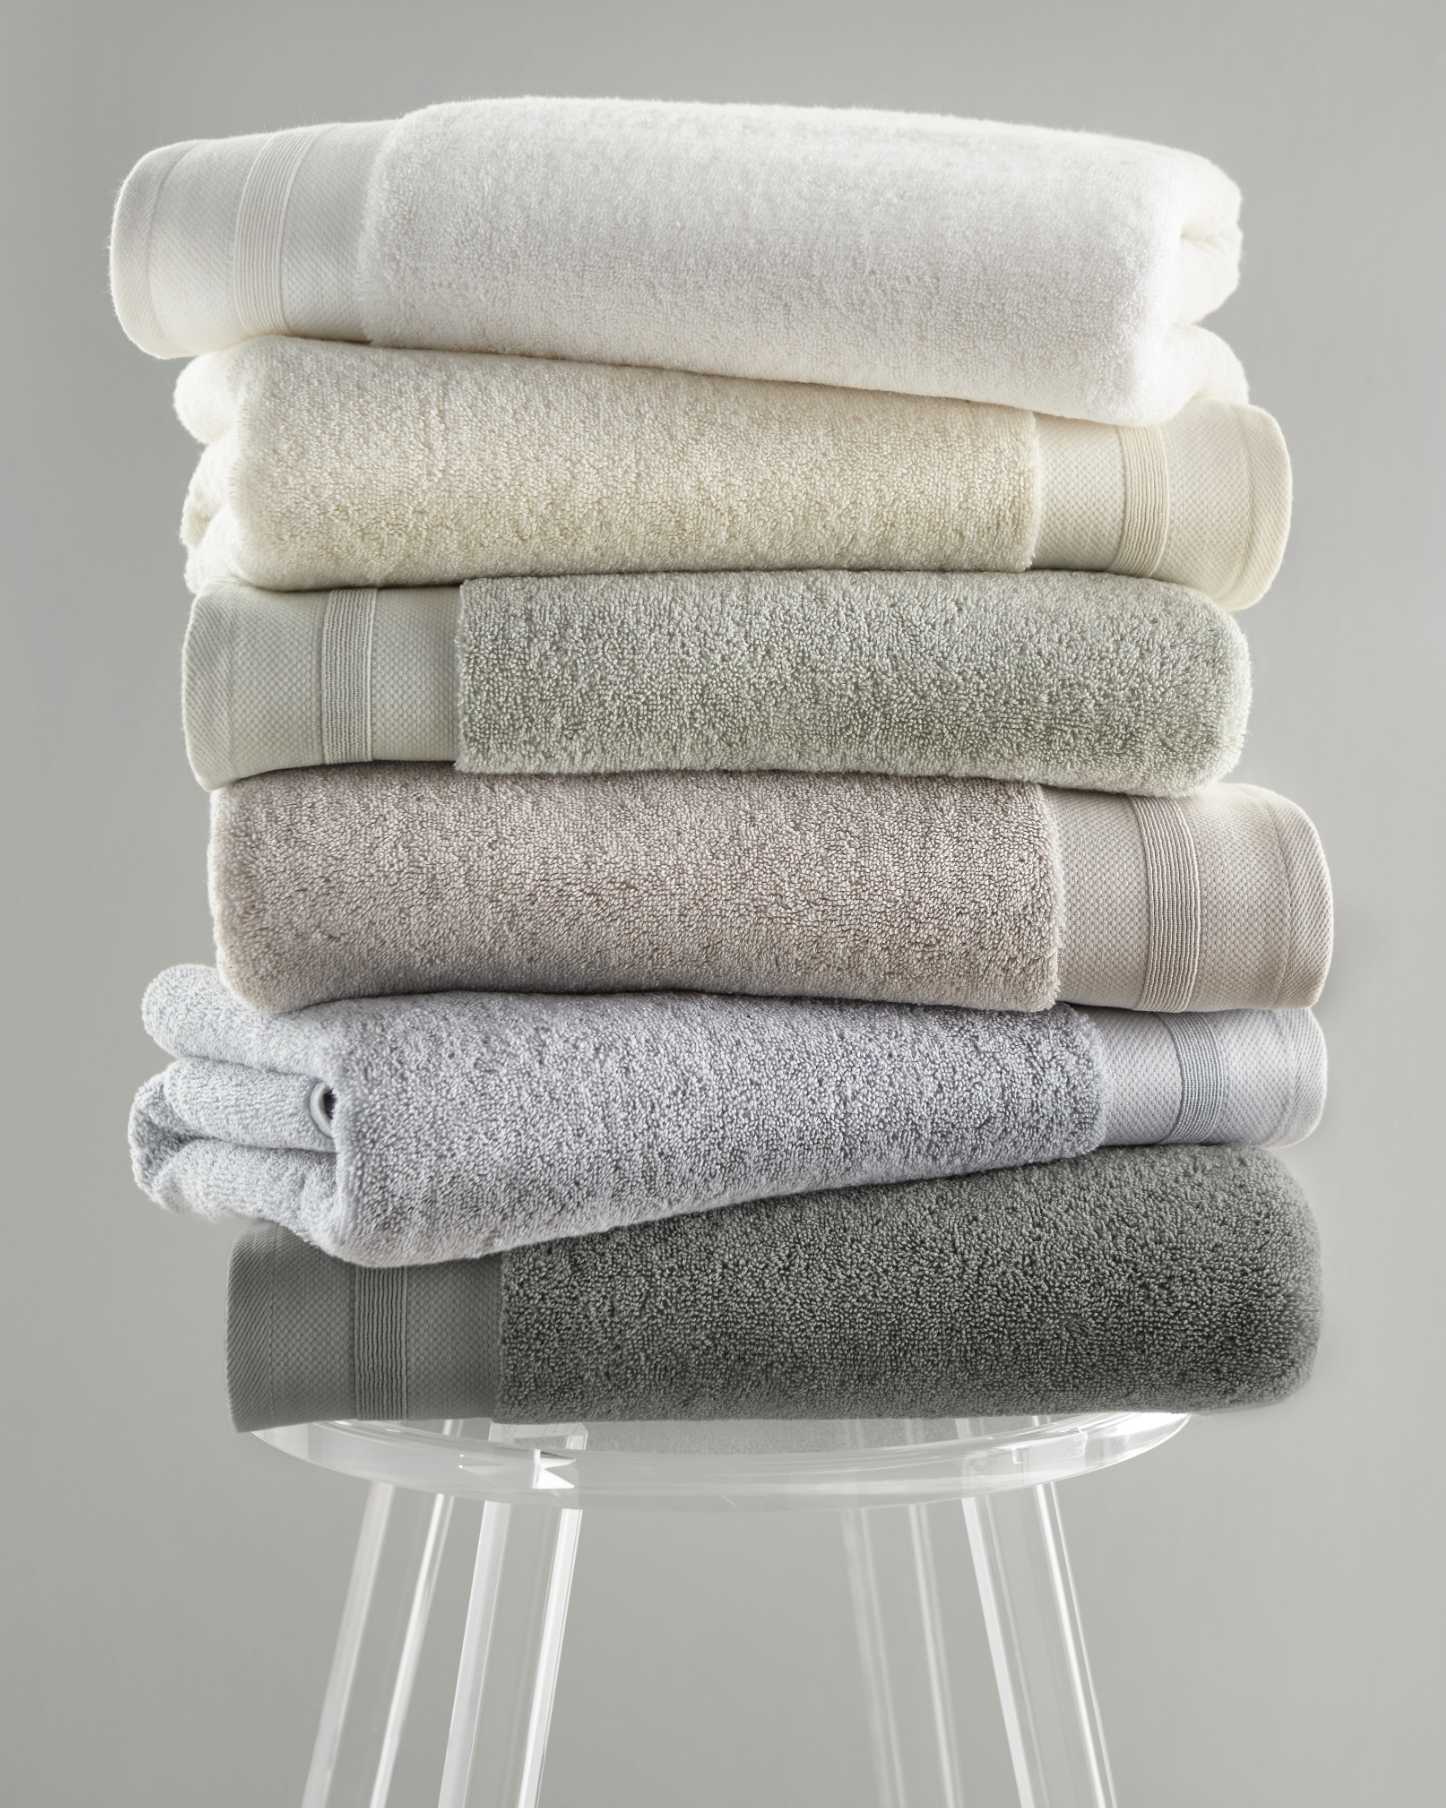 How to Get Soft, Fluffy Towels Without Fabric Softener